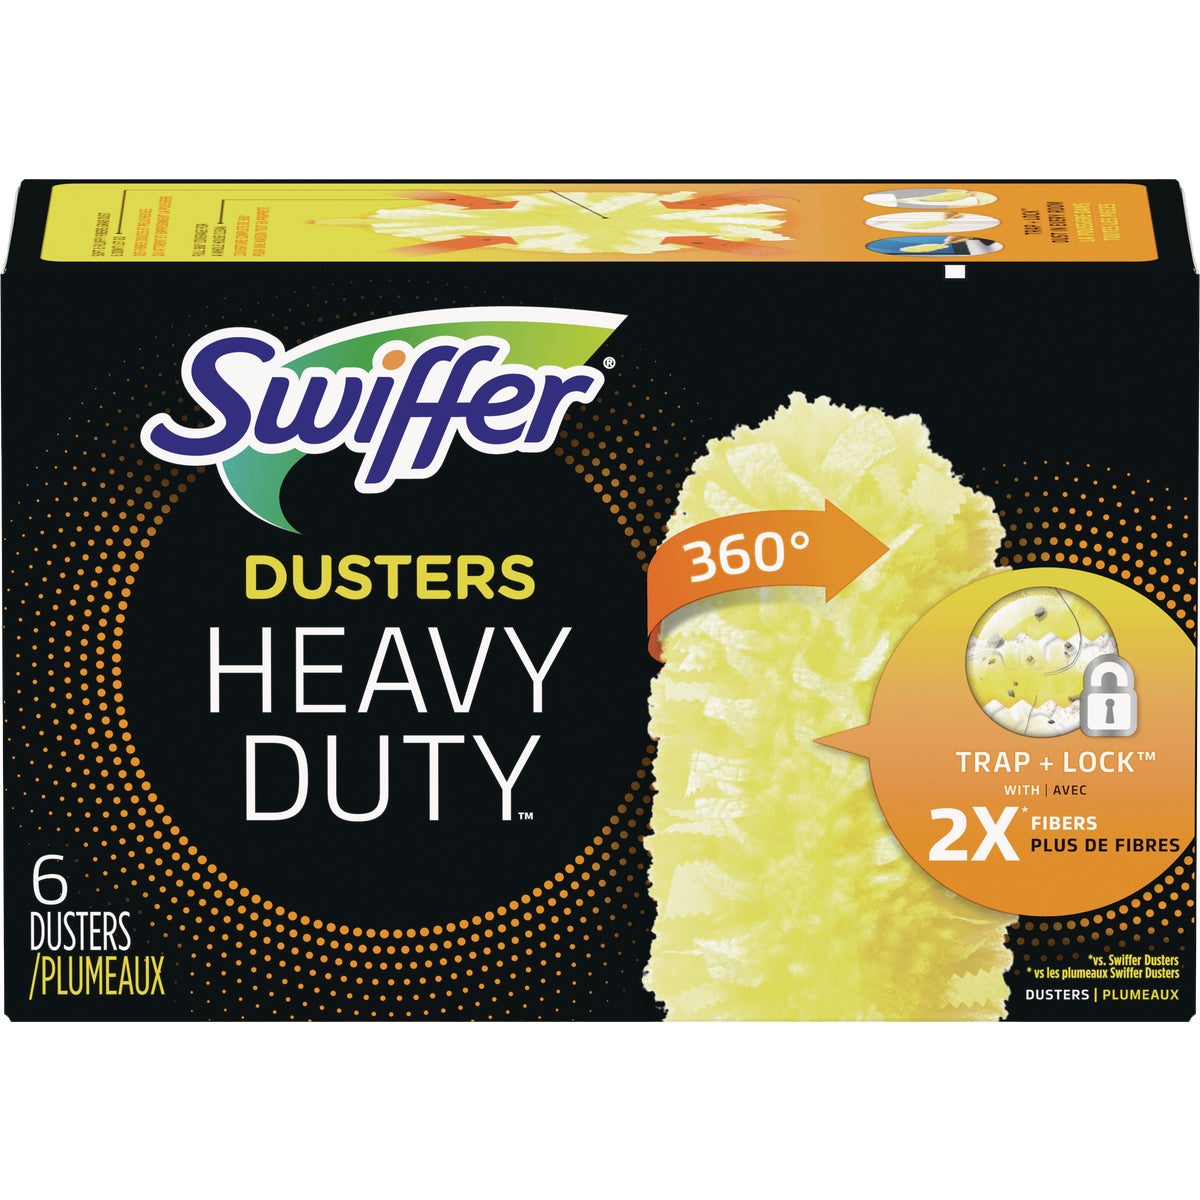 Item 627600, Thousands of deep-cleaning fibers reduce allergens up to 90%.